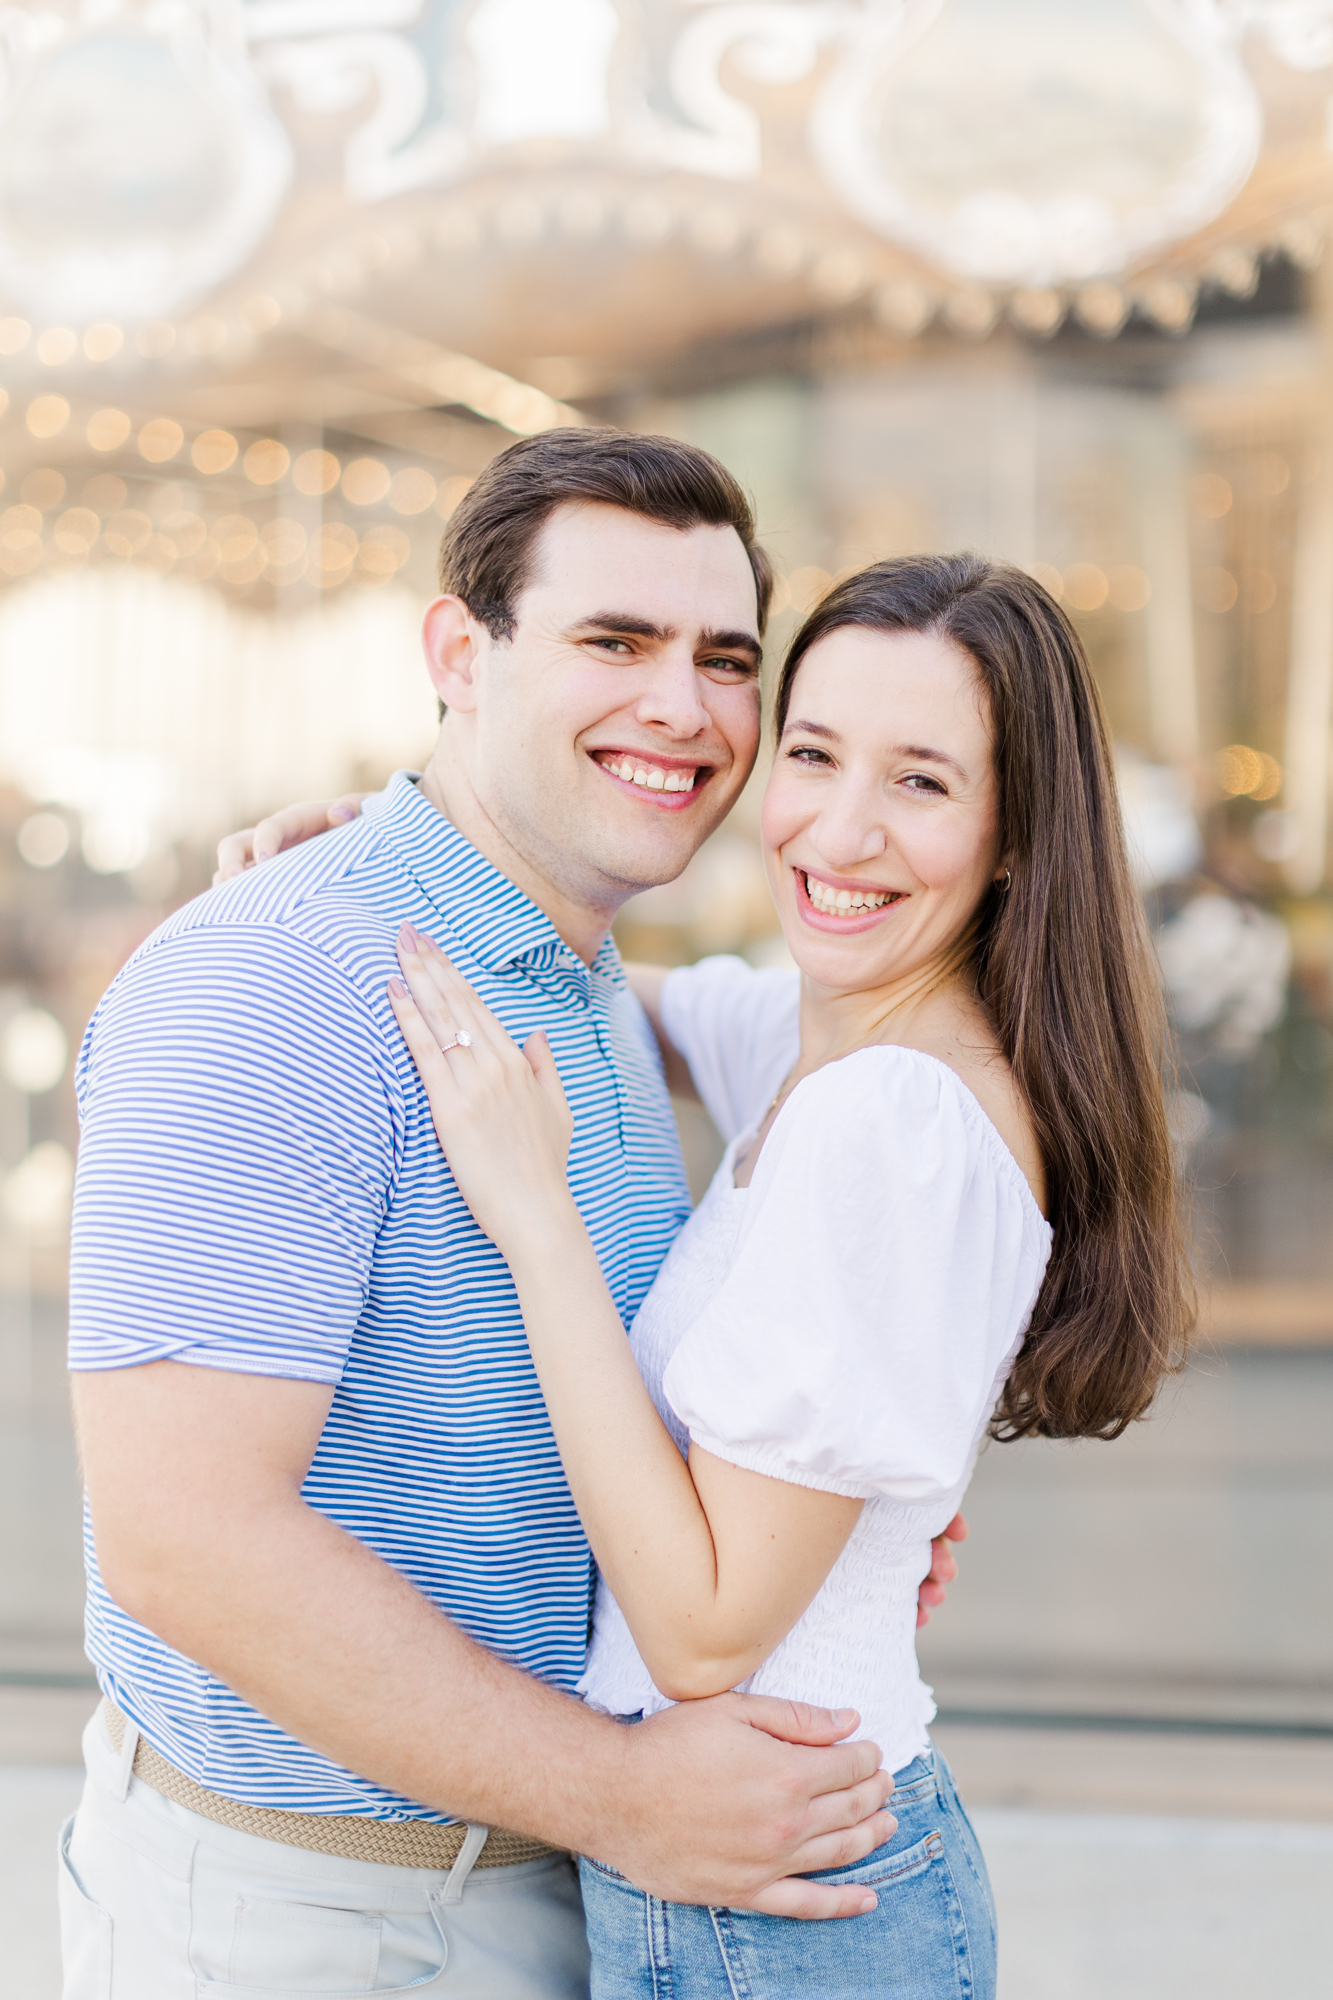 Special Brooklyn Bridge Engagement Photography